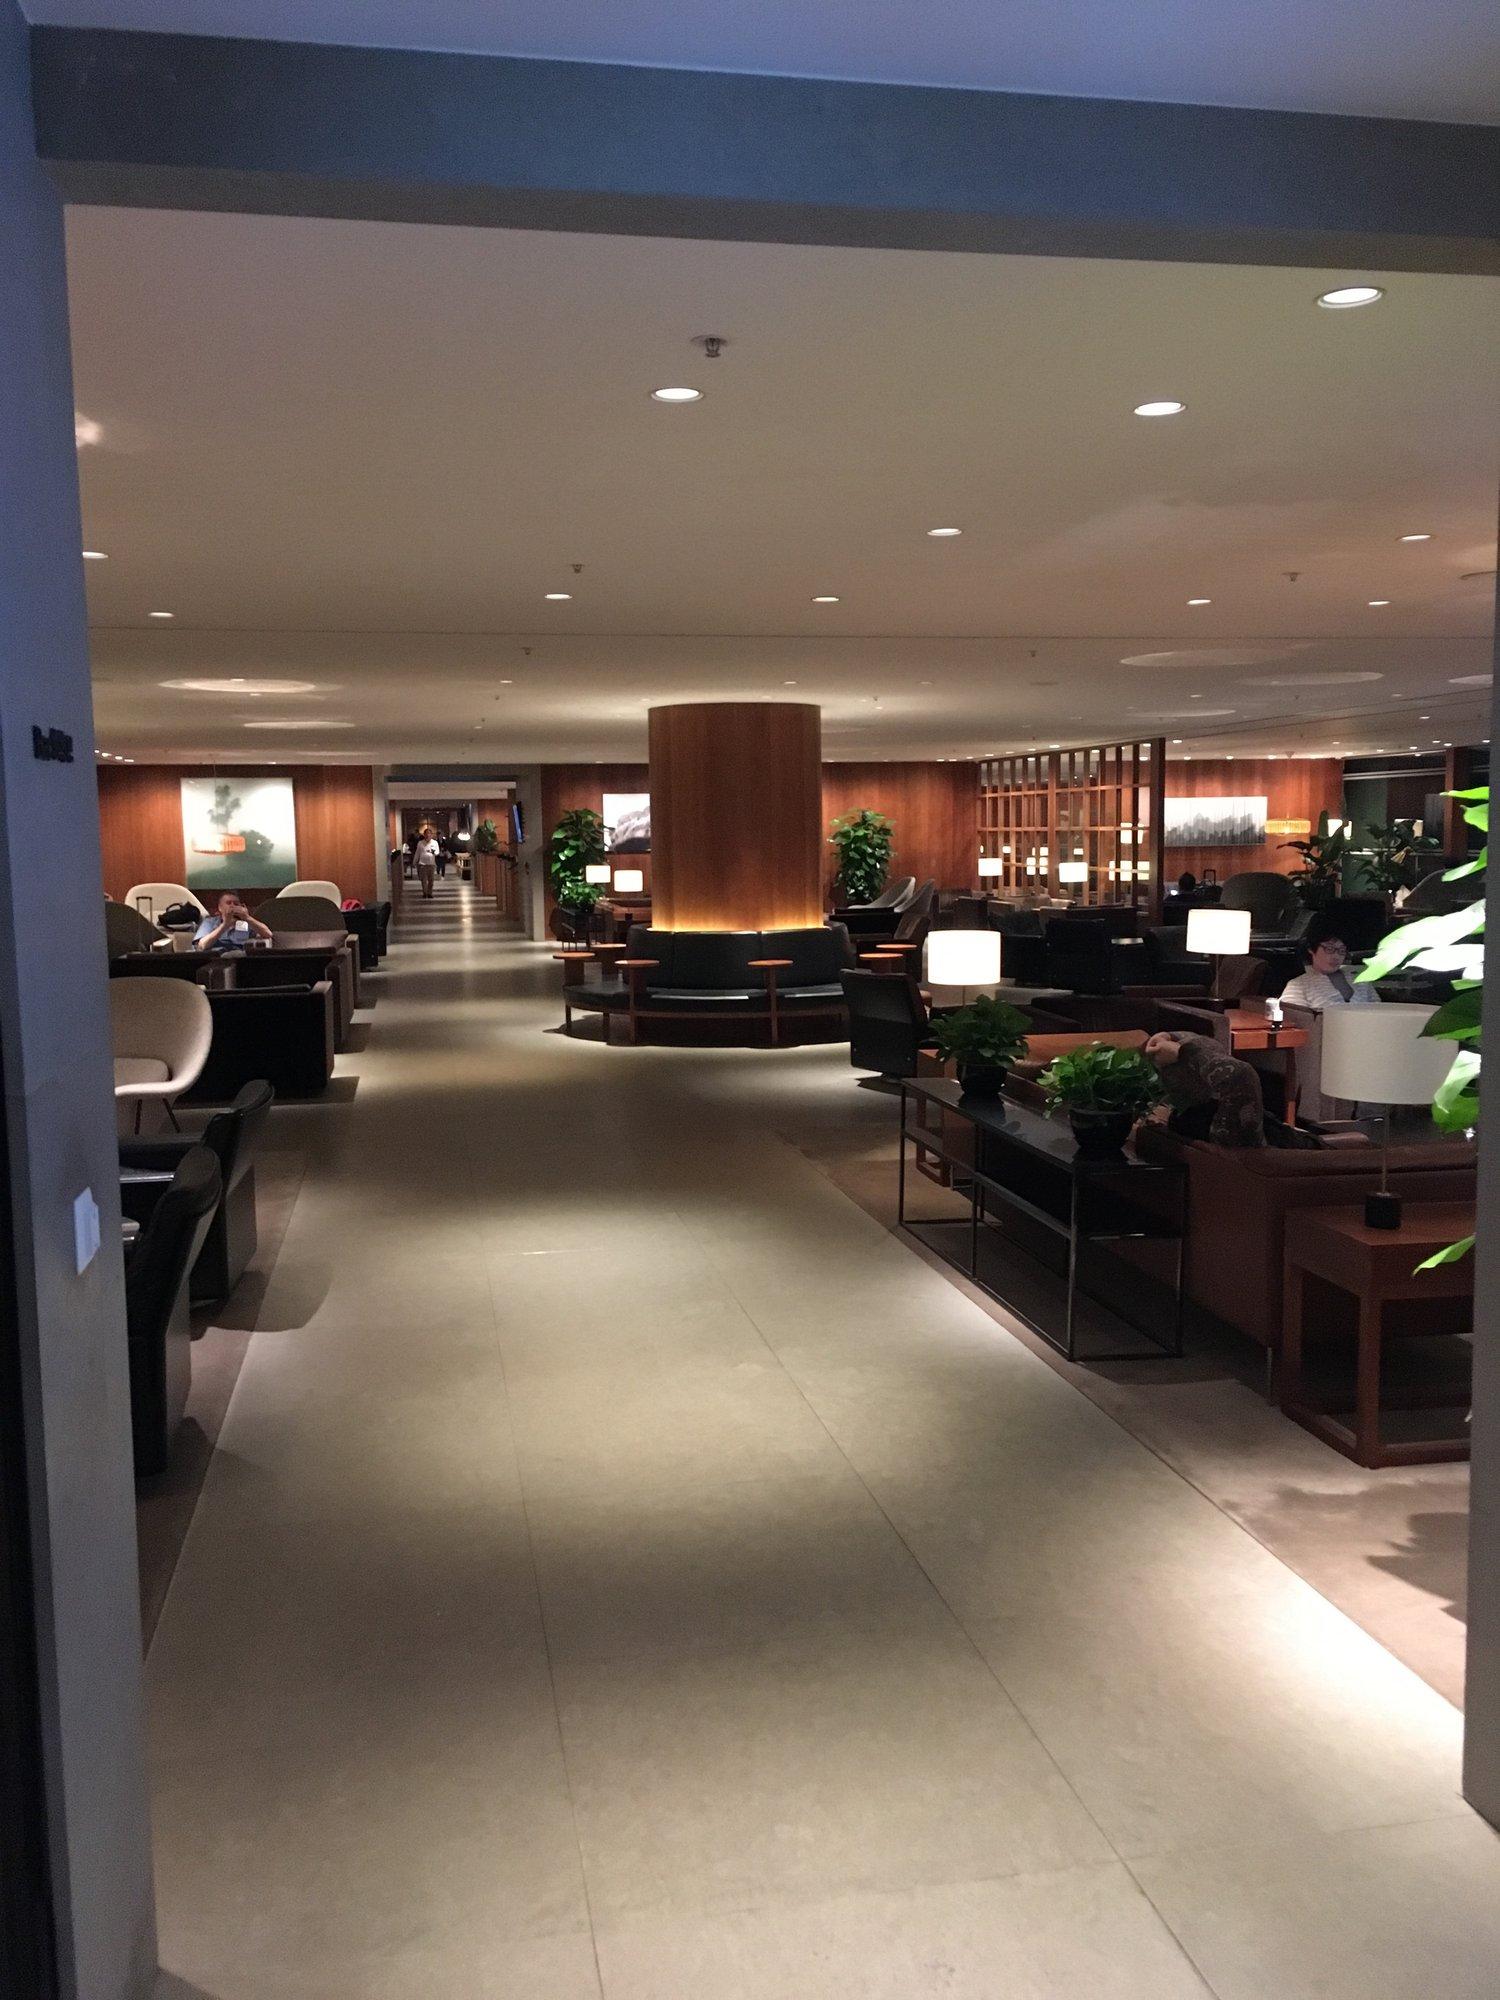 Cathay Pacific The Pier Business Class Lounge image 31 of 61